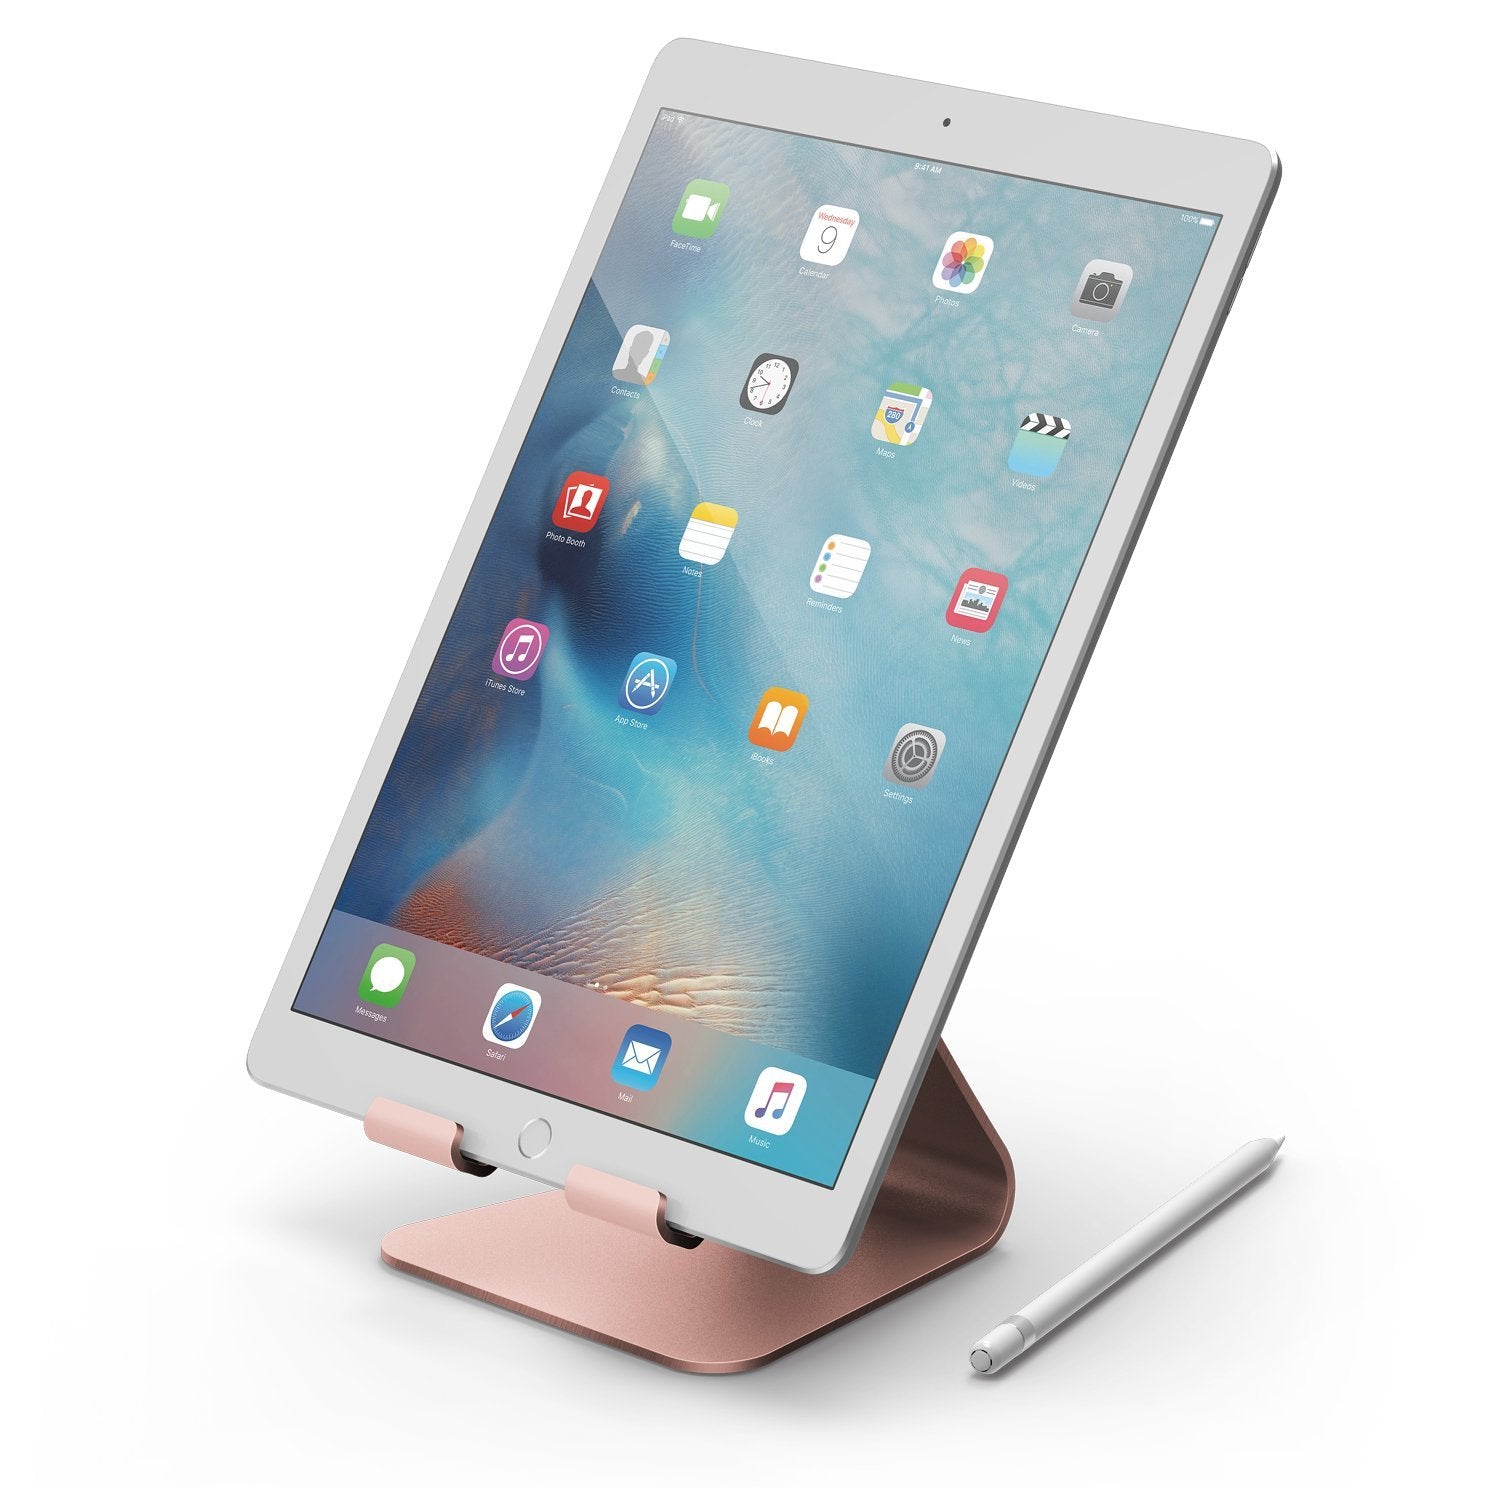 P4 Stand for iPad [2 Colors]